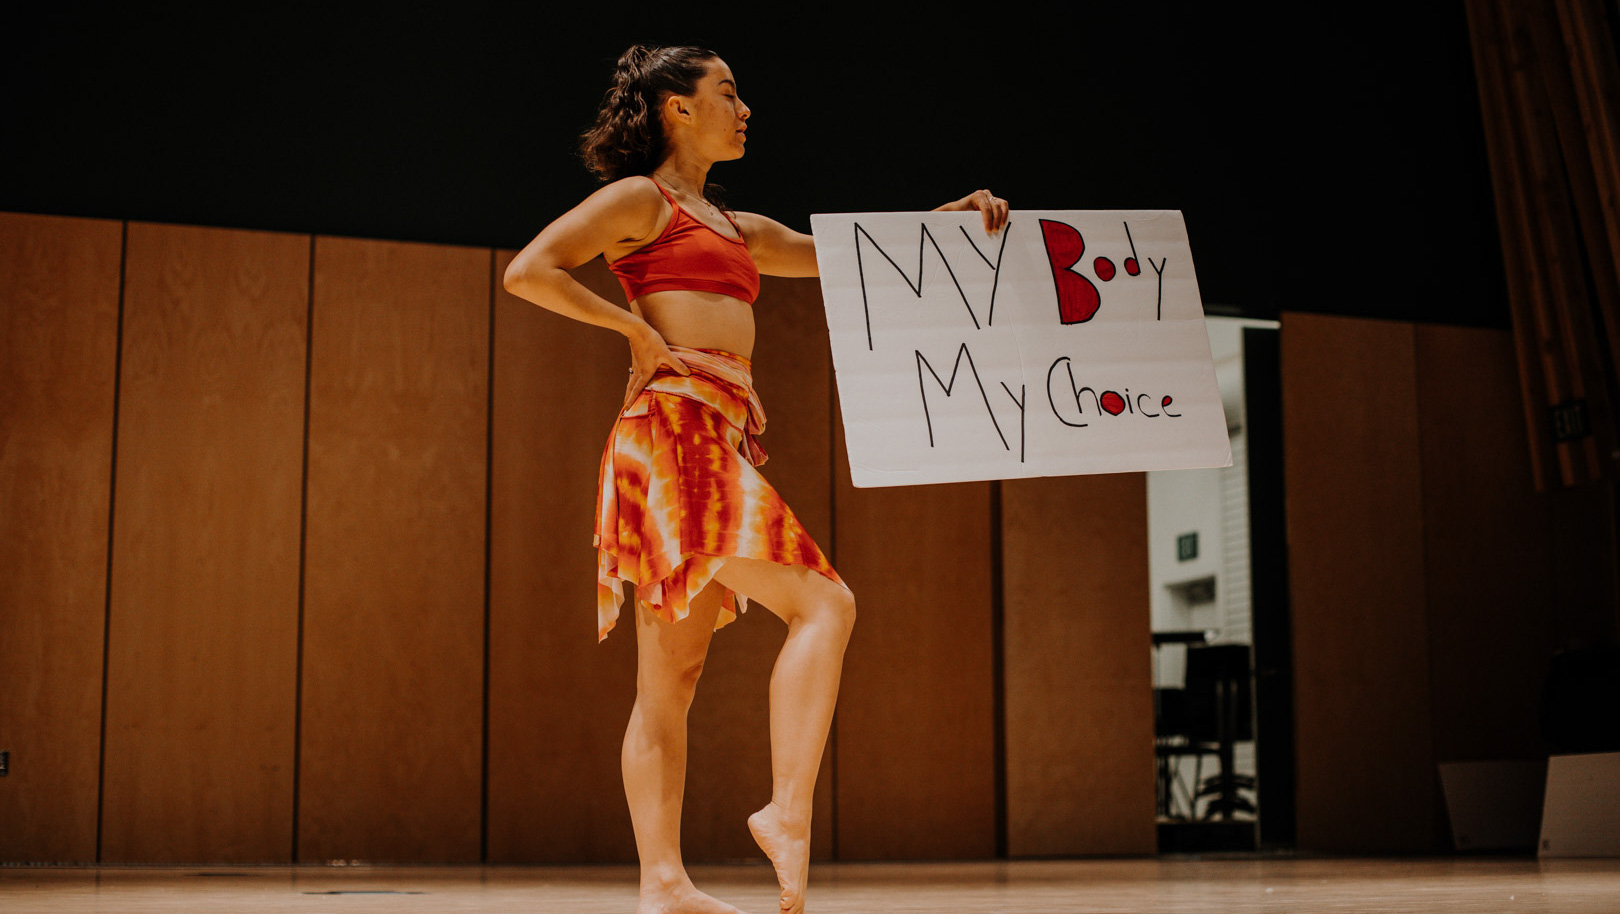 An art in society student performing and holding a sign that reads, "My body my choice".